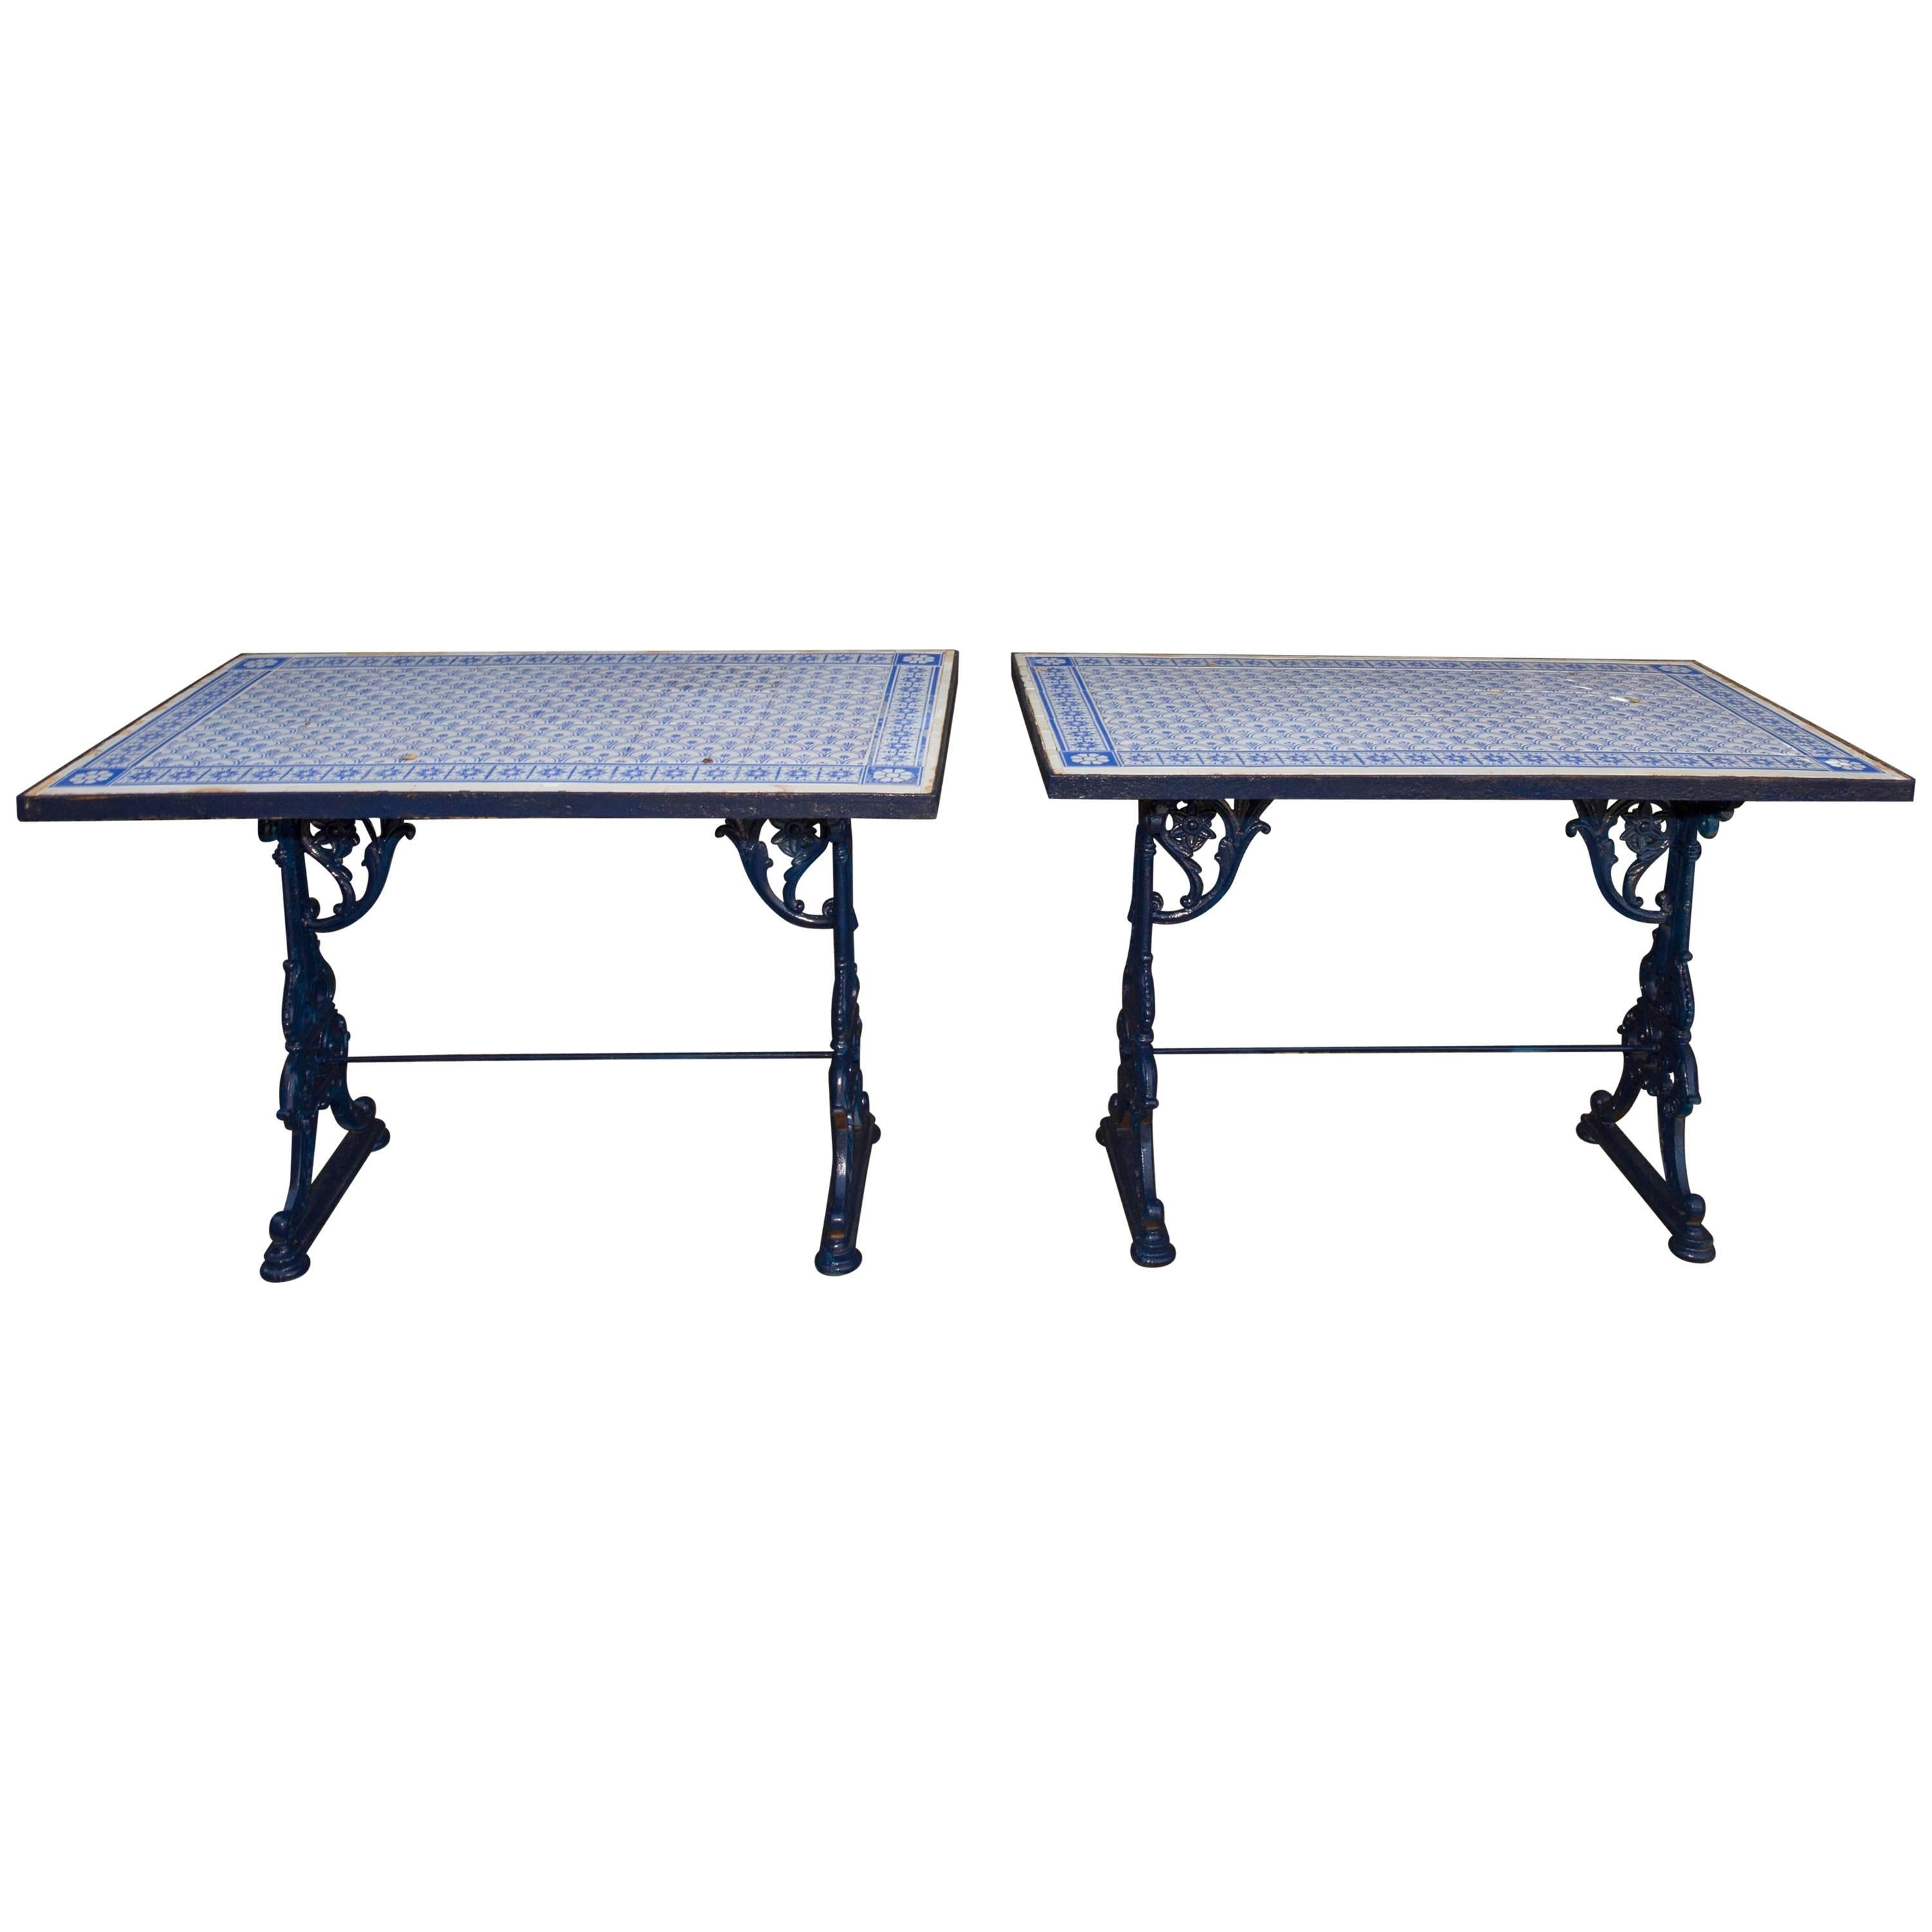 Pair of Iron Pub Table Consoles with Blue and White Tile Tops / Aesthetic Style